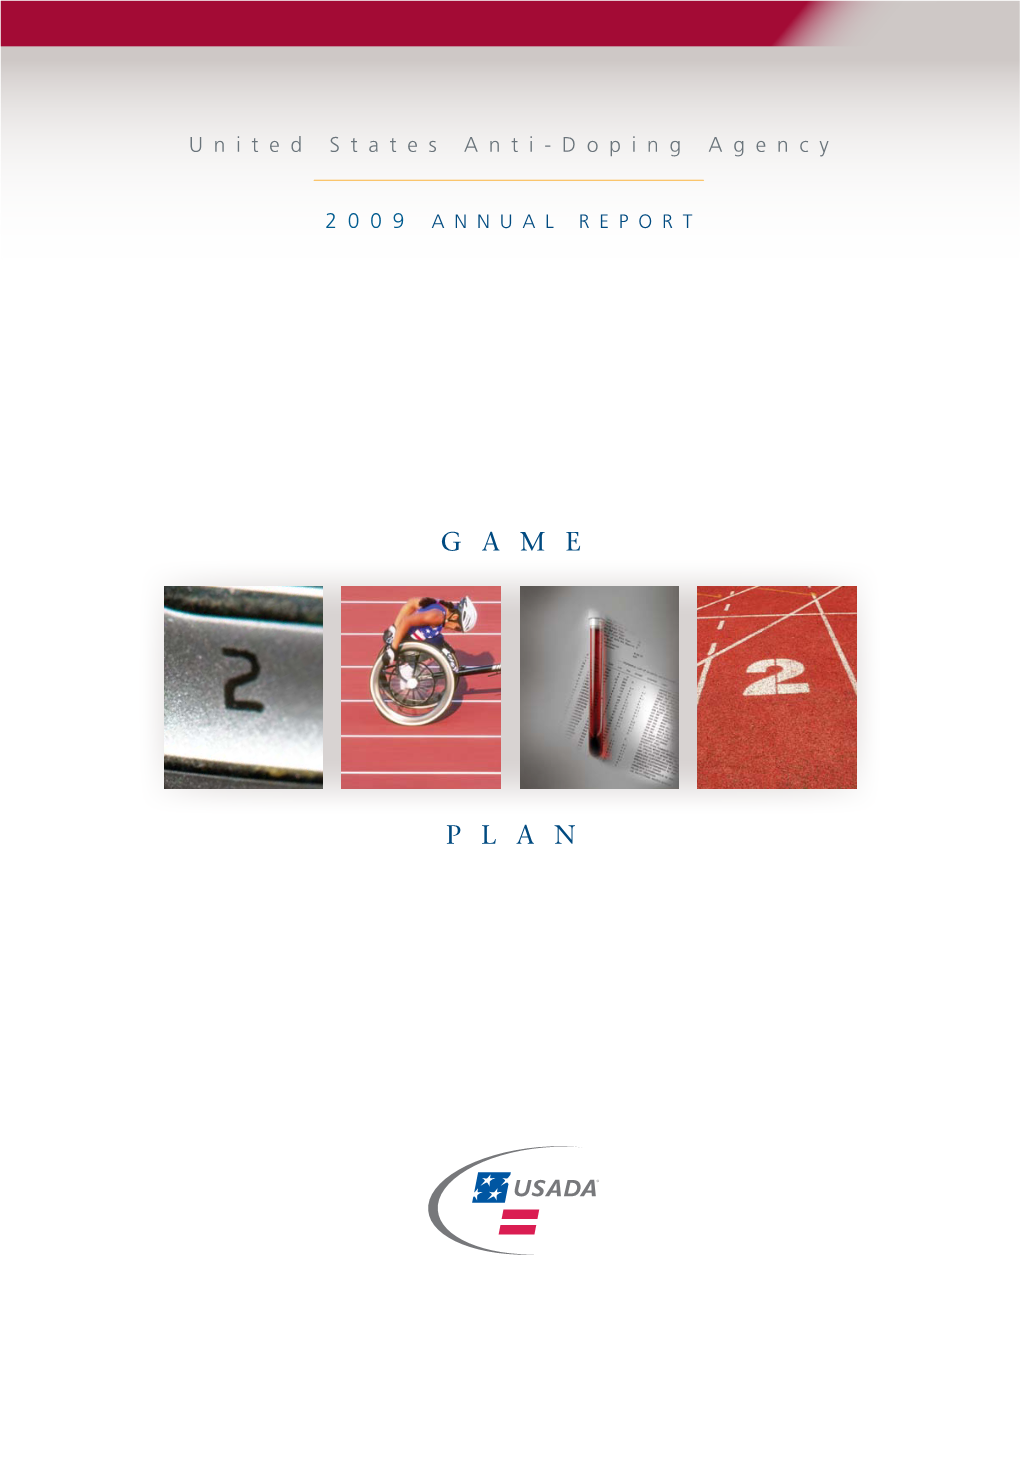 Game Plan 2012, Which Serves As the Roadmap for USADA Over the Next Four Years